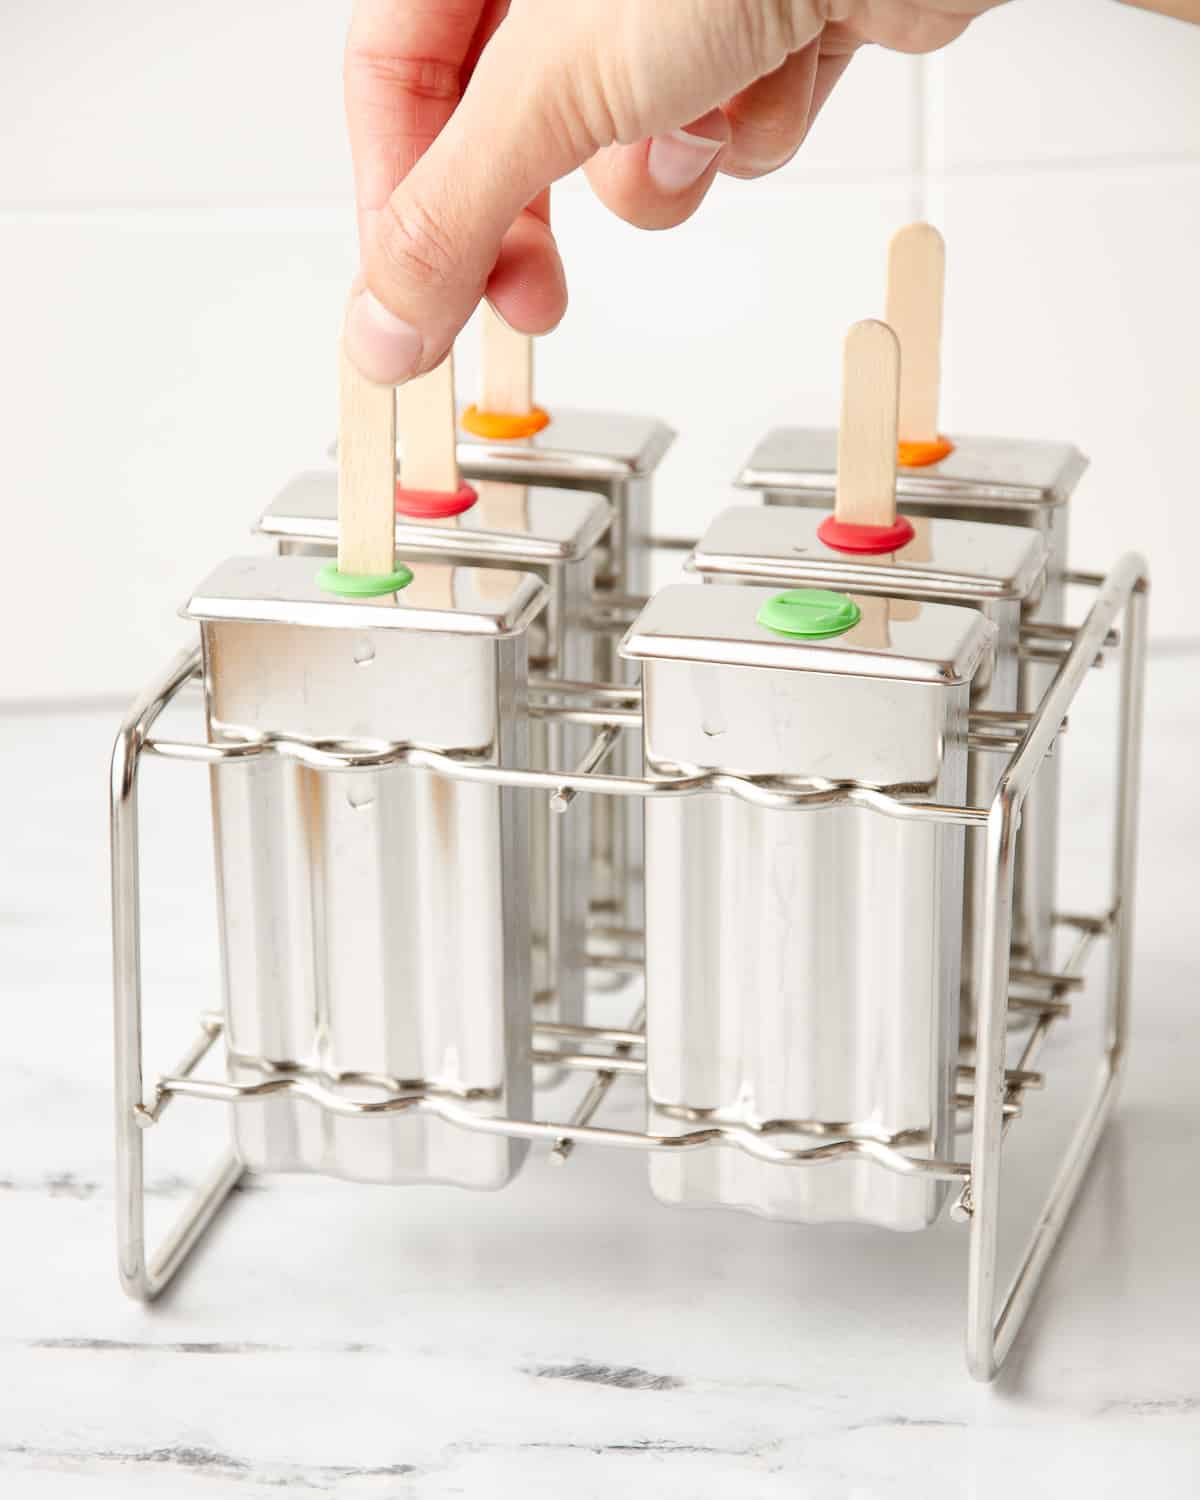 A hand putting a popsicle stick into a stainless steel mold.